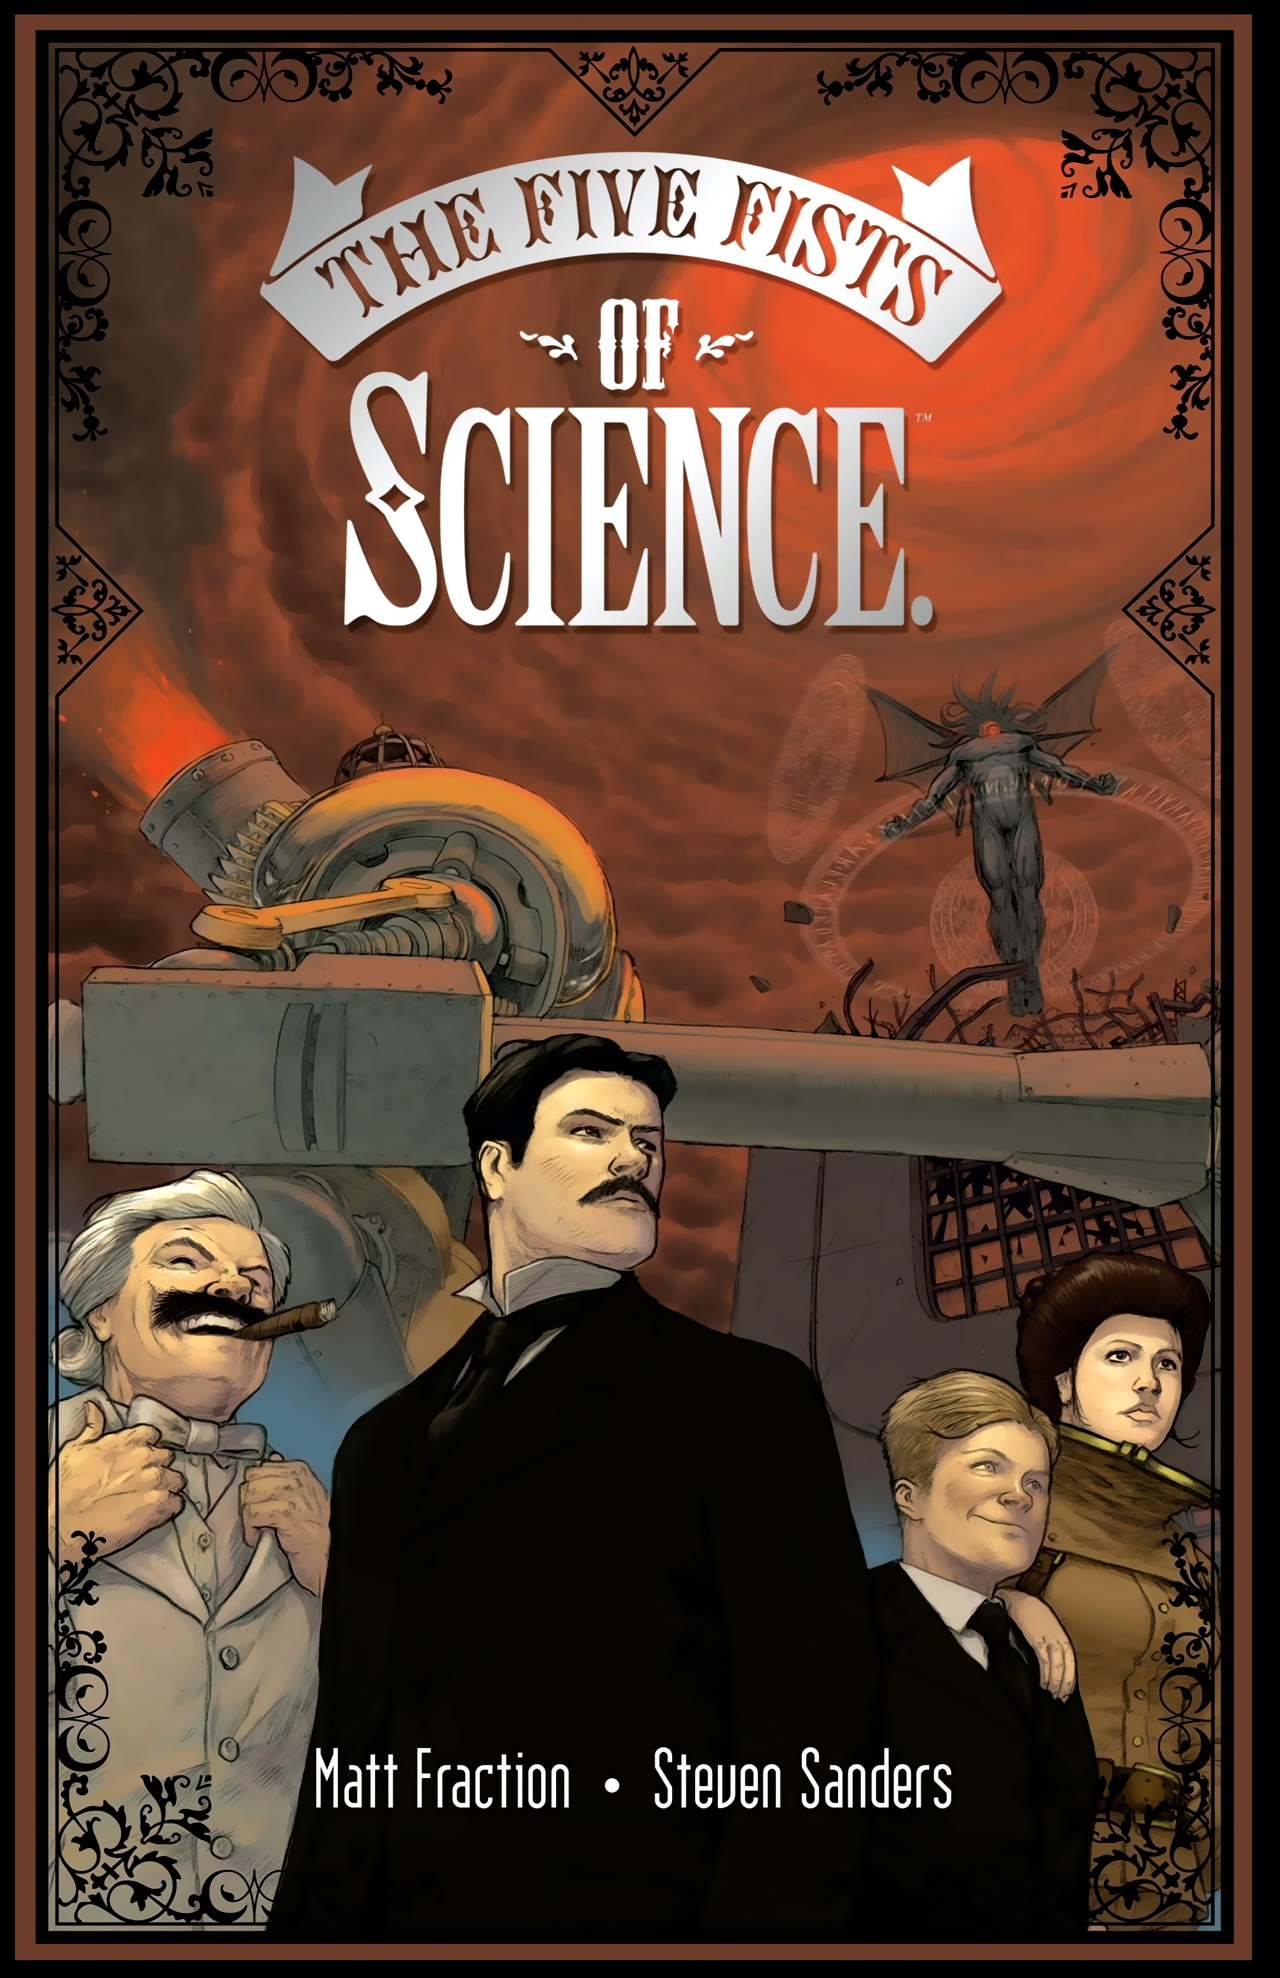 Read online The Five Fists of Science comic -  Issue # TPB - 1